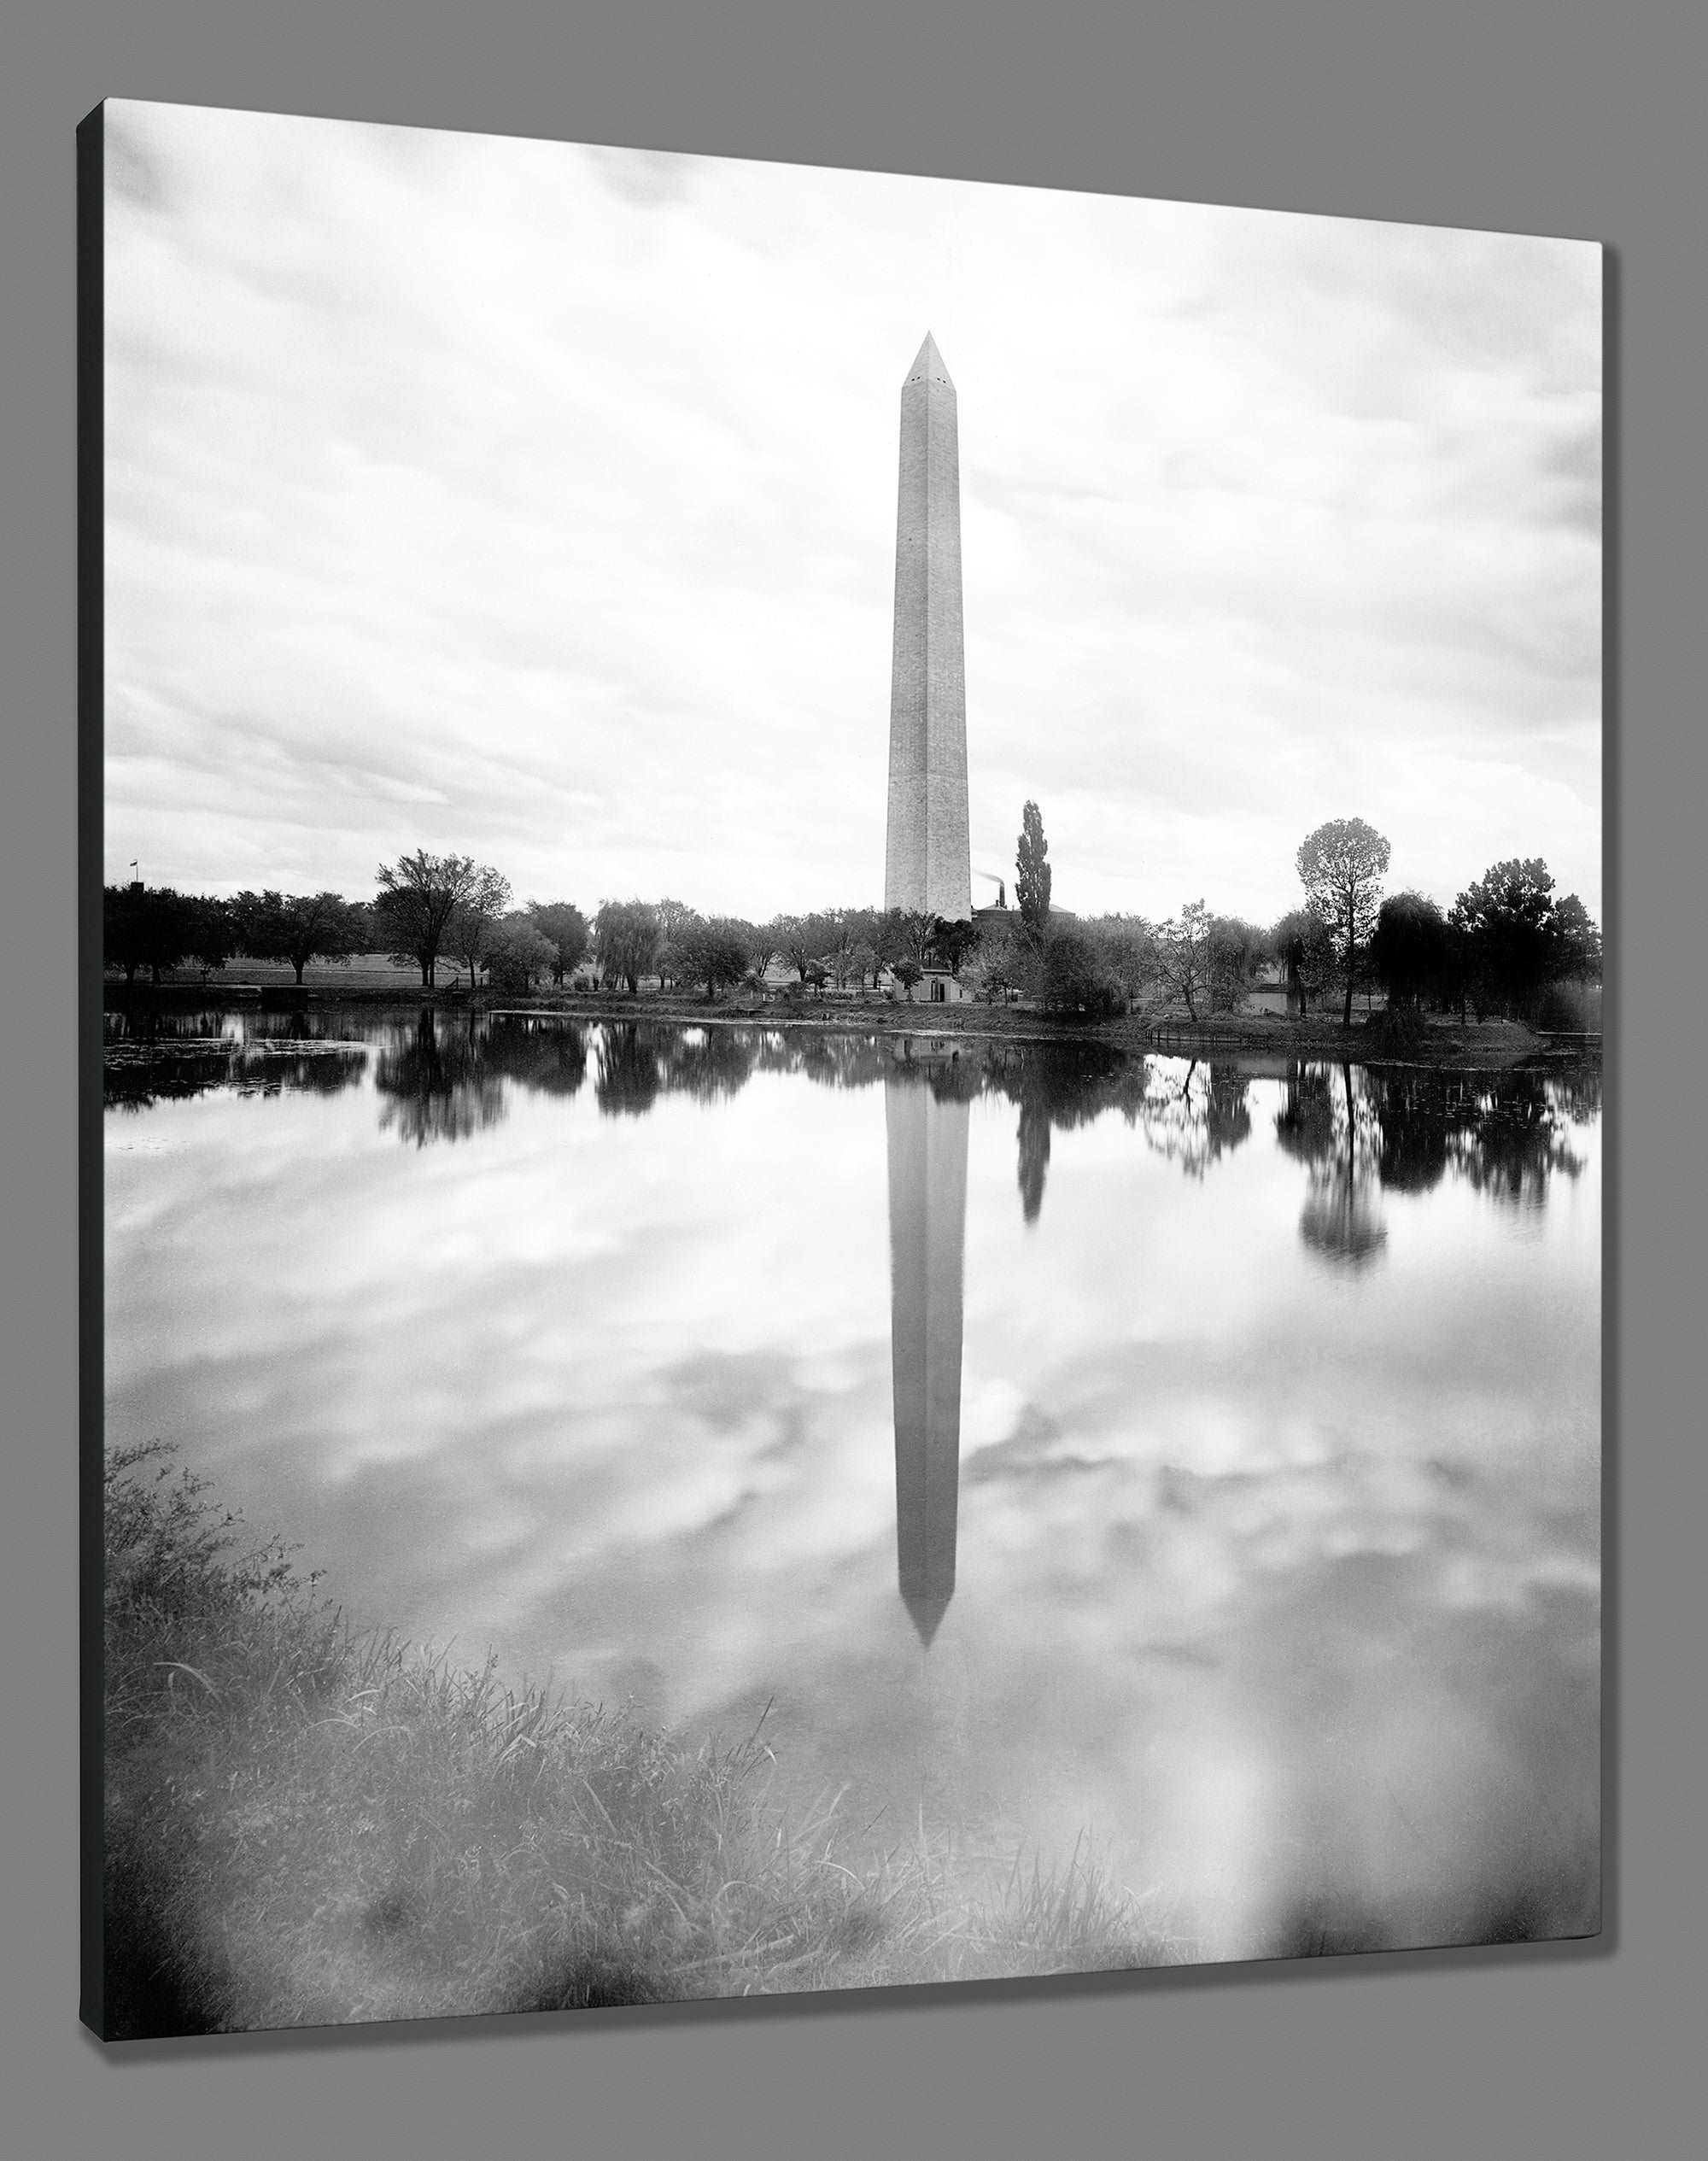 A canvas print of a restored vintage photograph of the Washington Monument